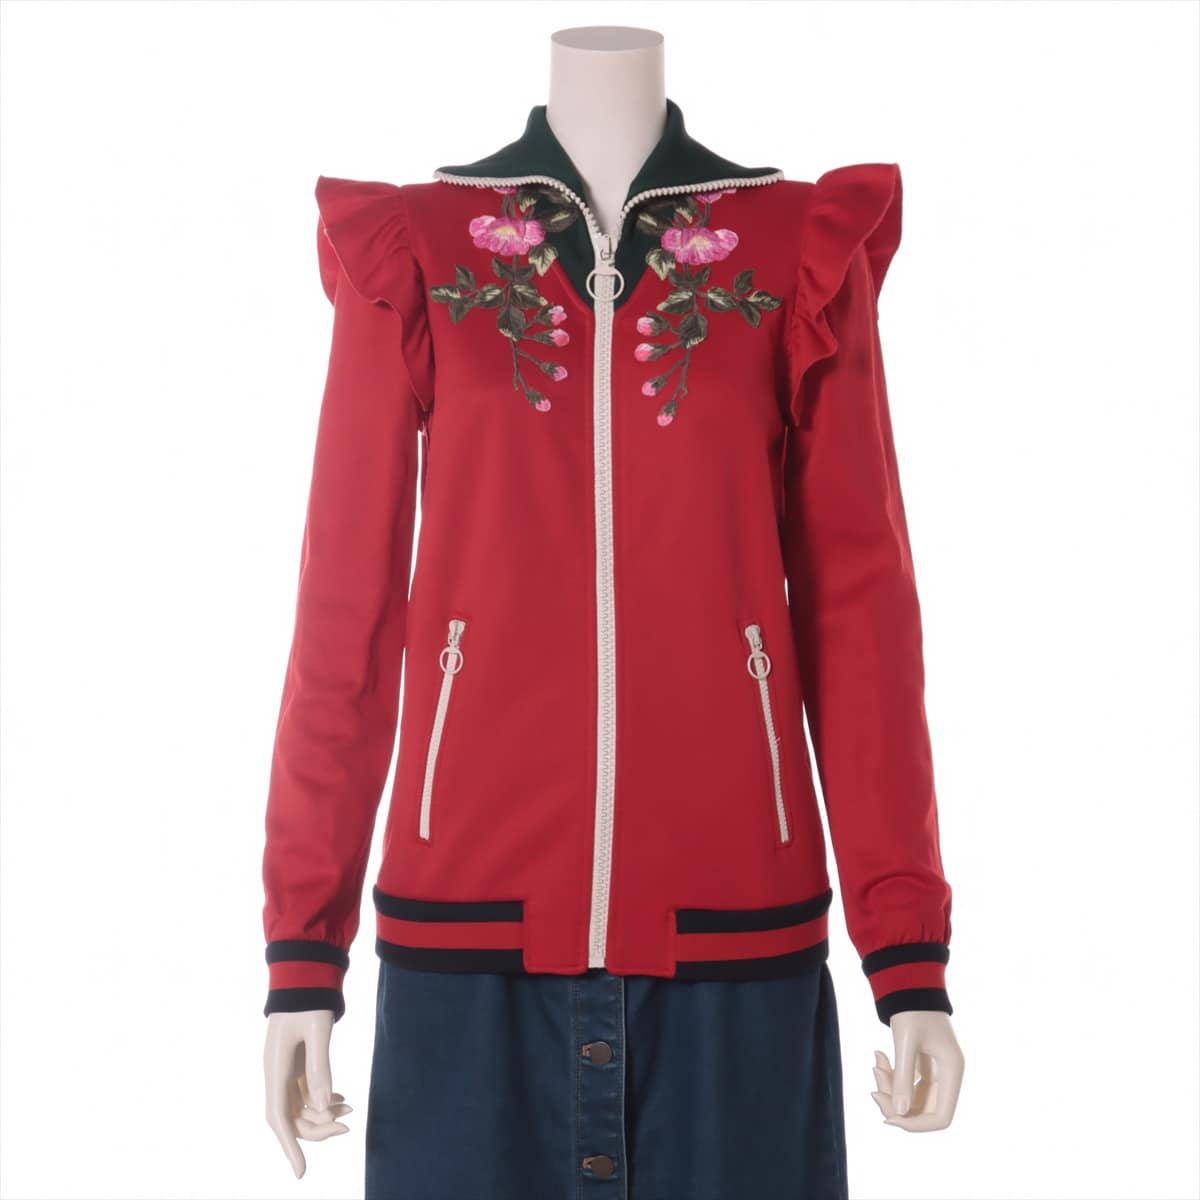 Gucci 17AW Polyester & Nylon Sweatsuit S Ladies' Red x green  479536 flower embroidery